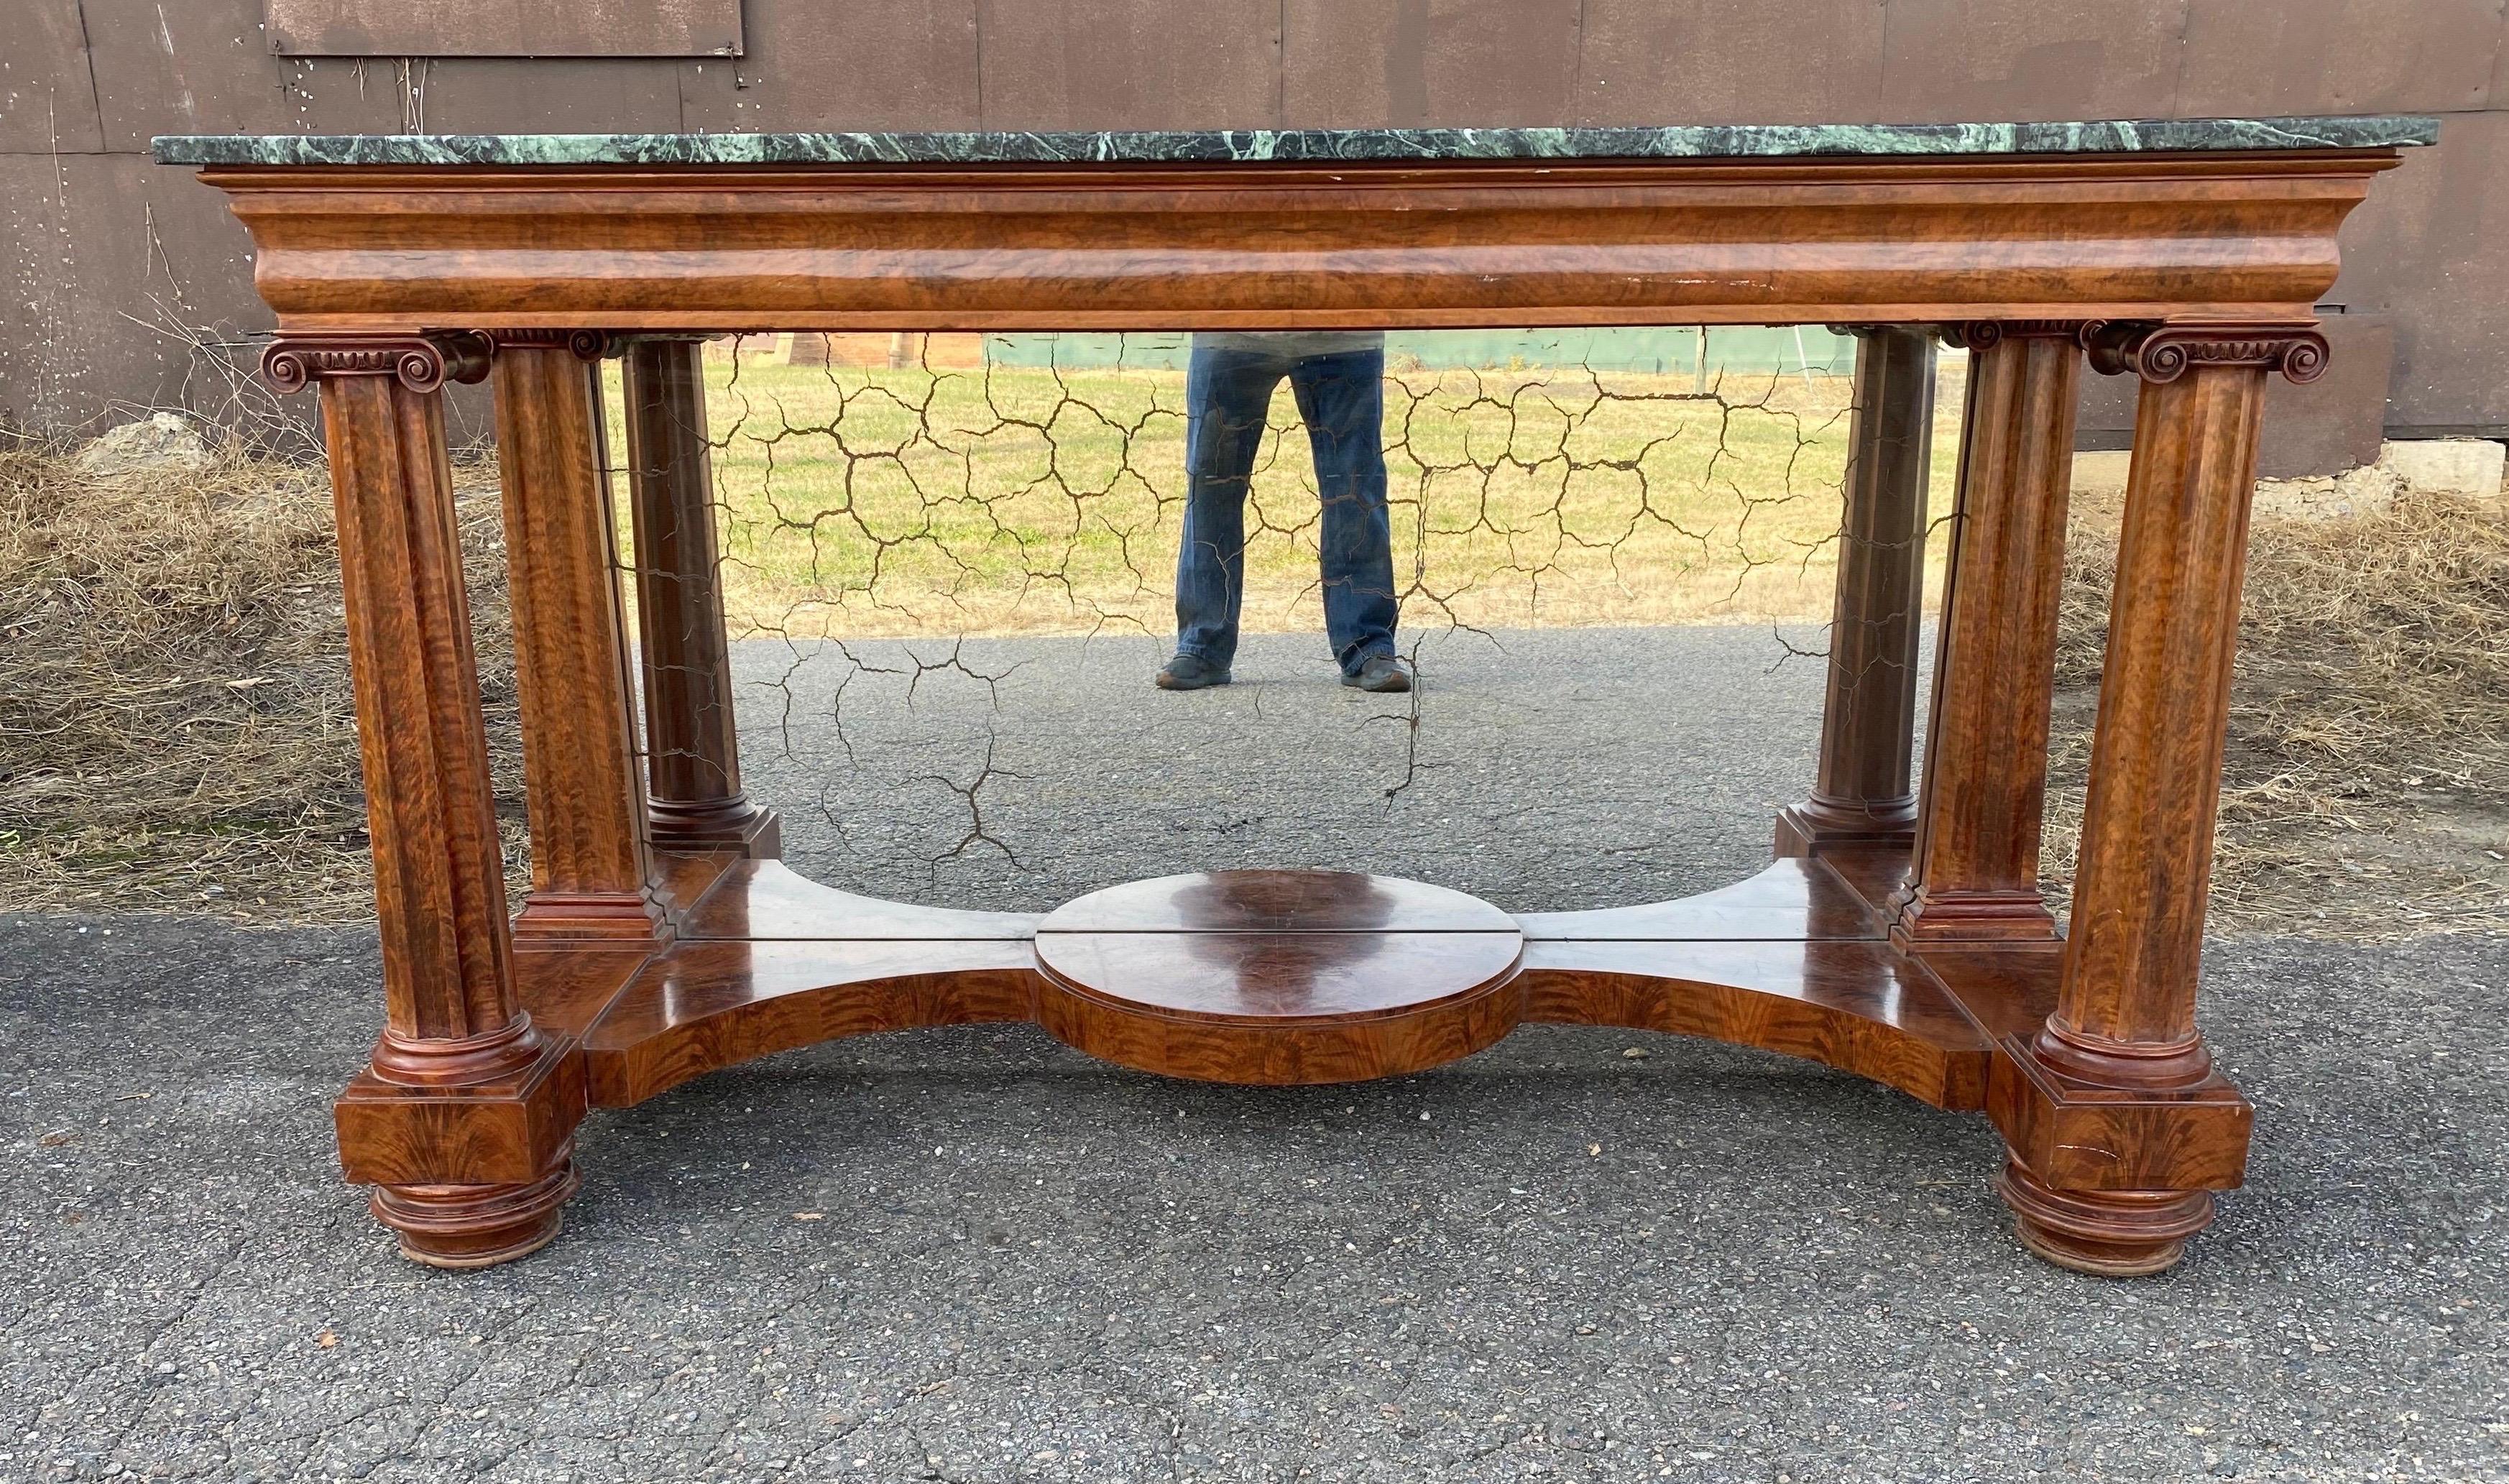 Impressive 19th century American Classical period mahogany marble top console with mirrored back. The console has highly figured mahogany veneered columns and capitals encasing a mirrored back and curved base. There are two drawers that slide out